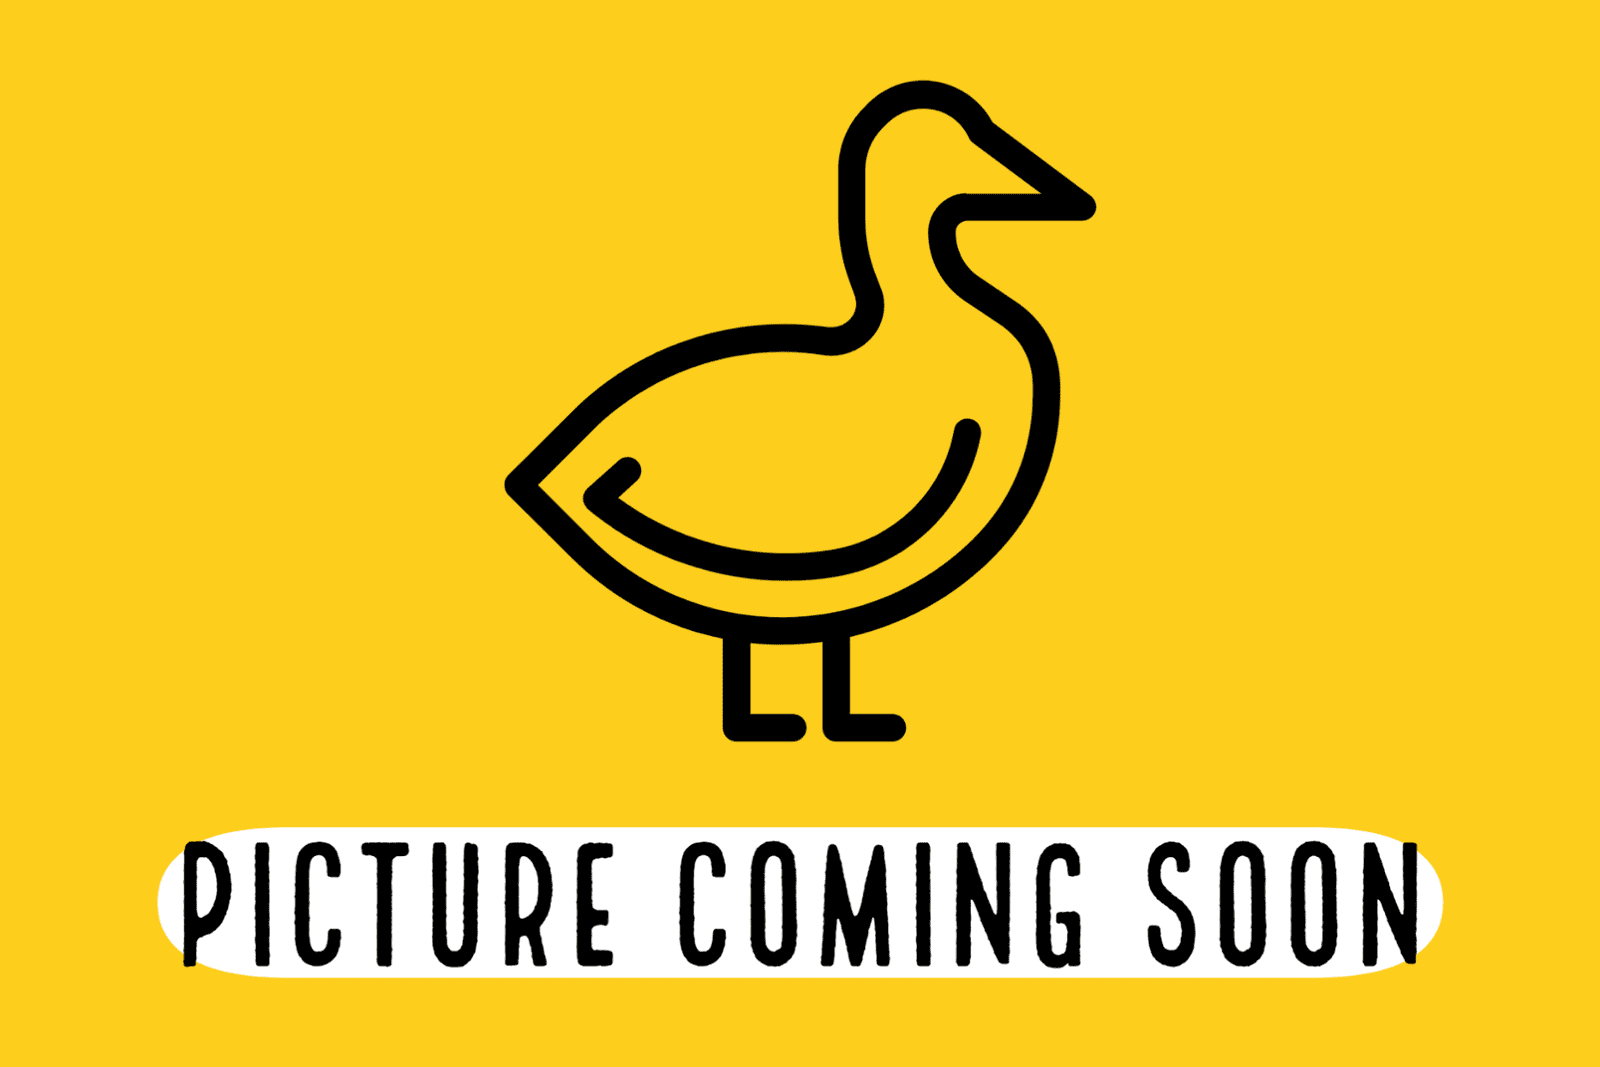 A black duck outline with a yellow background that says picture coming soon.